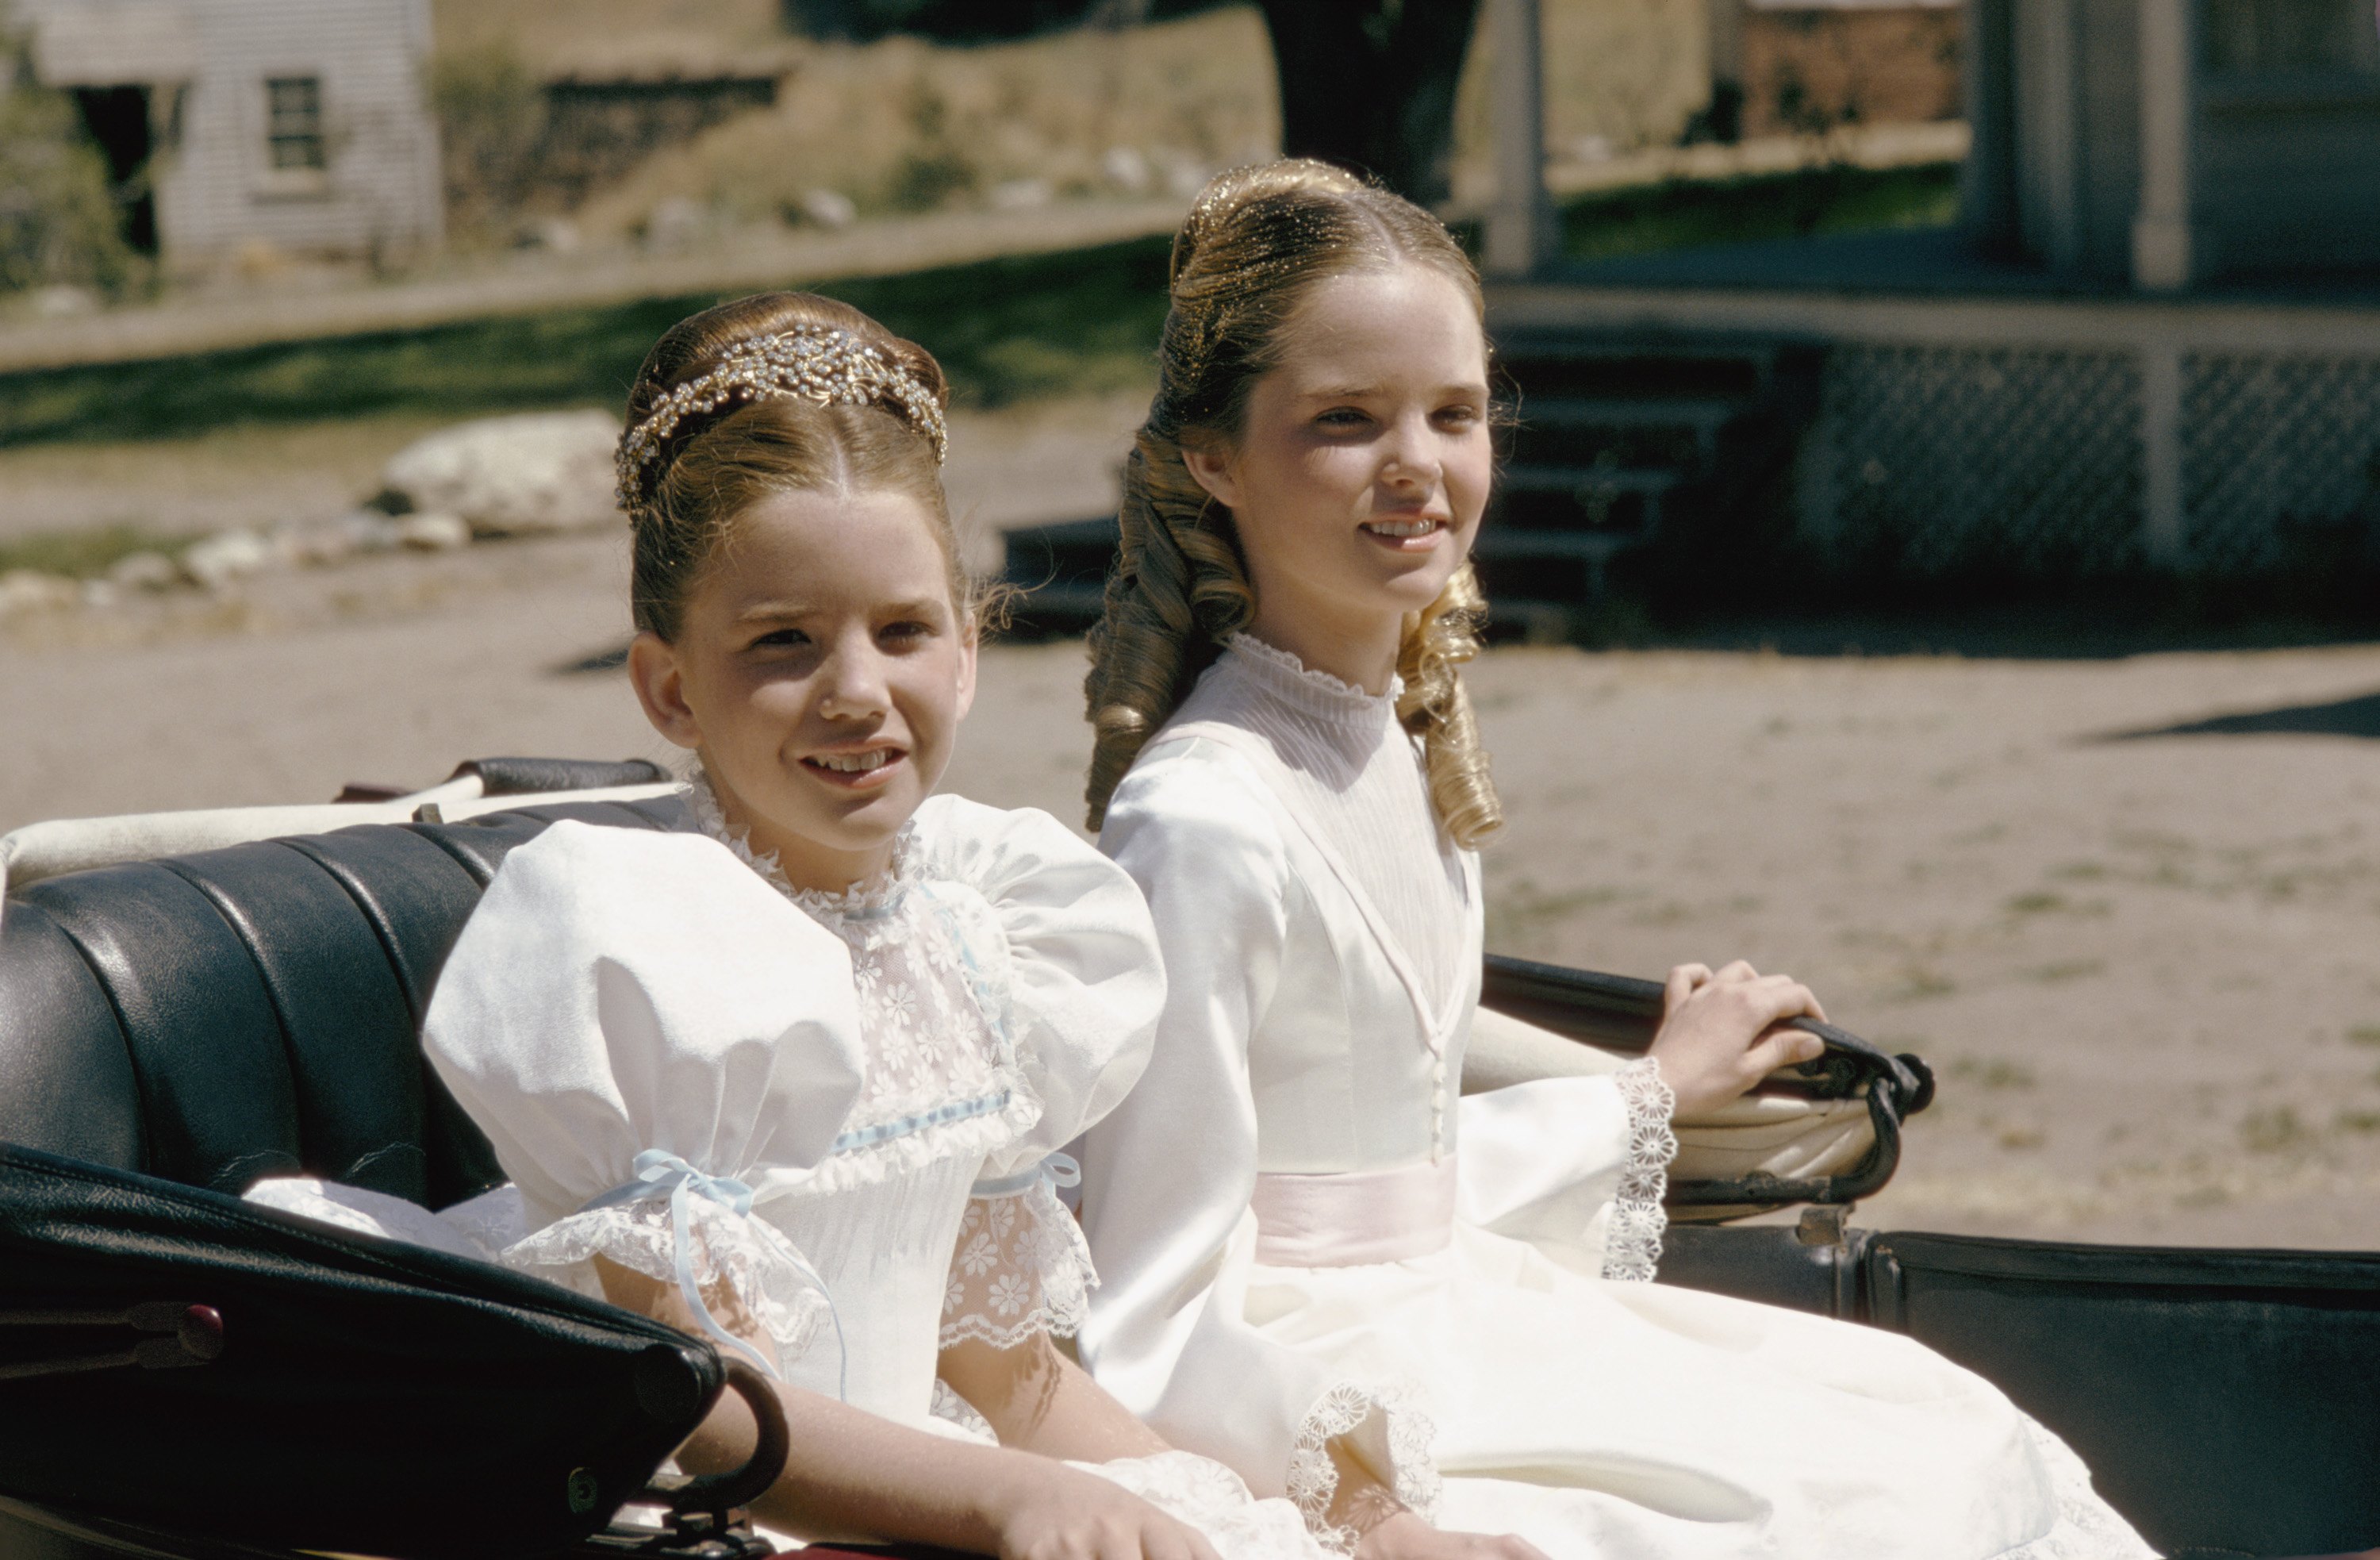 Melissa Gilbert as Laura Elizabeth Ingalls, Melissa Sue Anderson as Mary Ingalls. | Source: Getty Images